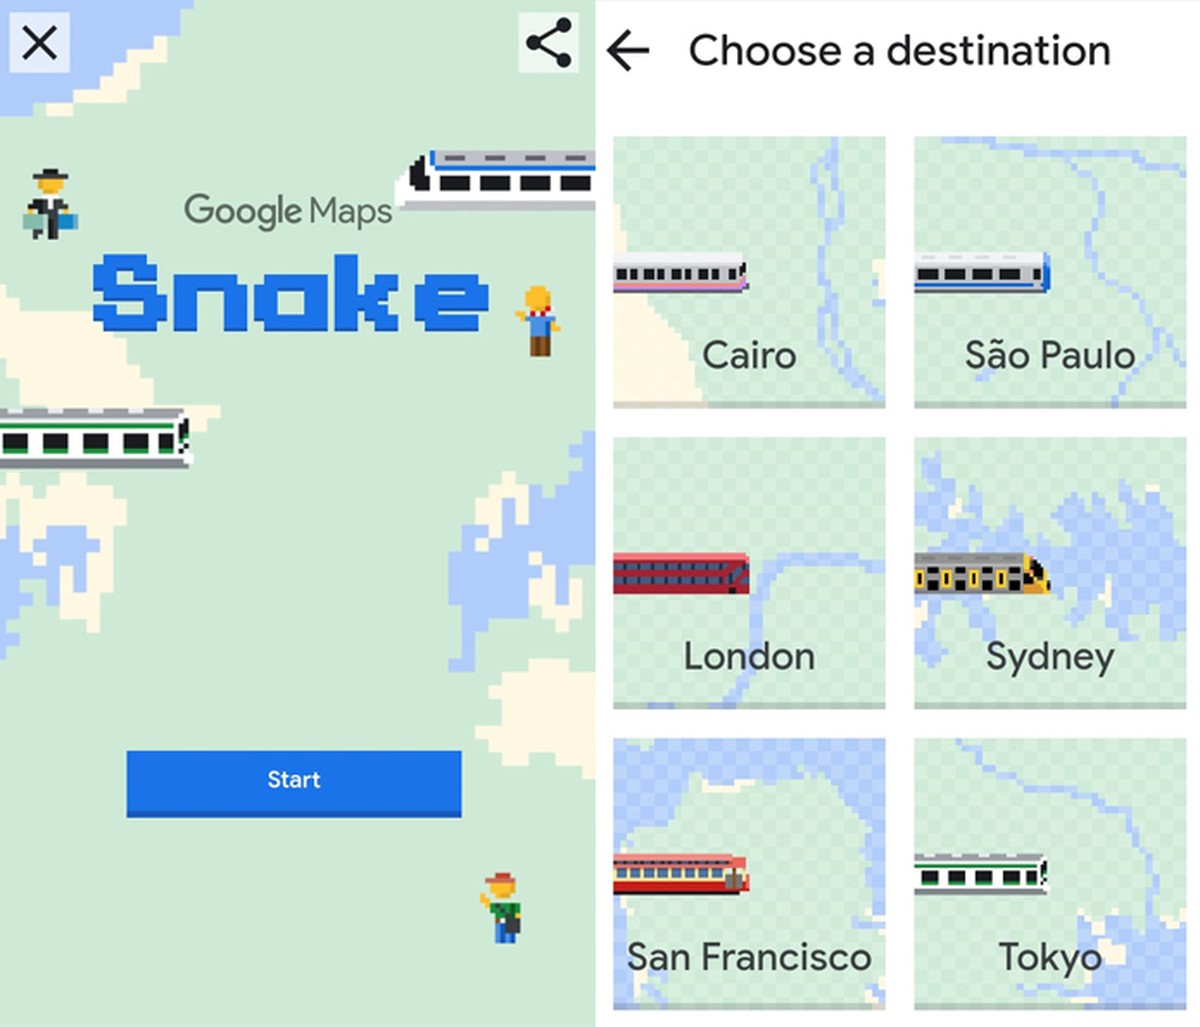 Snake: Google Celebrates April 1 with Cobrinha Game on Maps | Maps and location